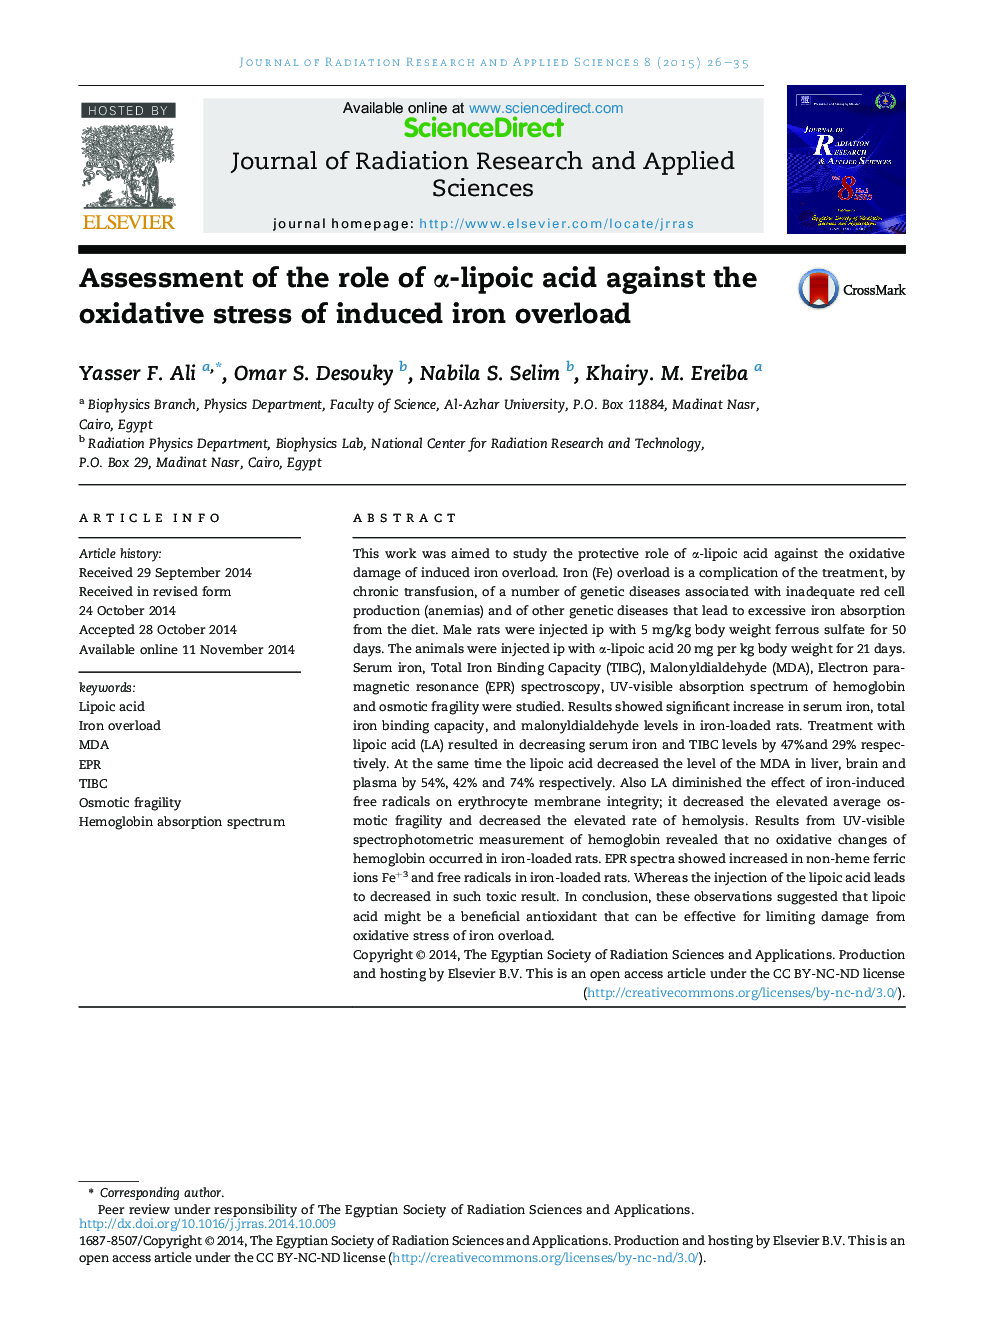 Assessment of the role of α-lipoic acid against the oxidative stress of induced iron overload 